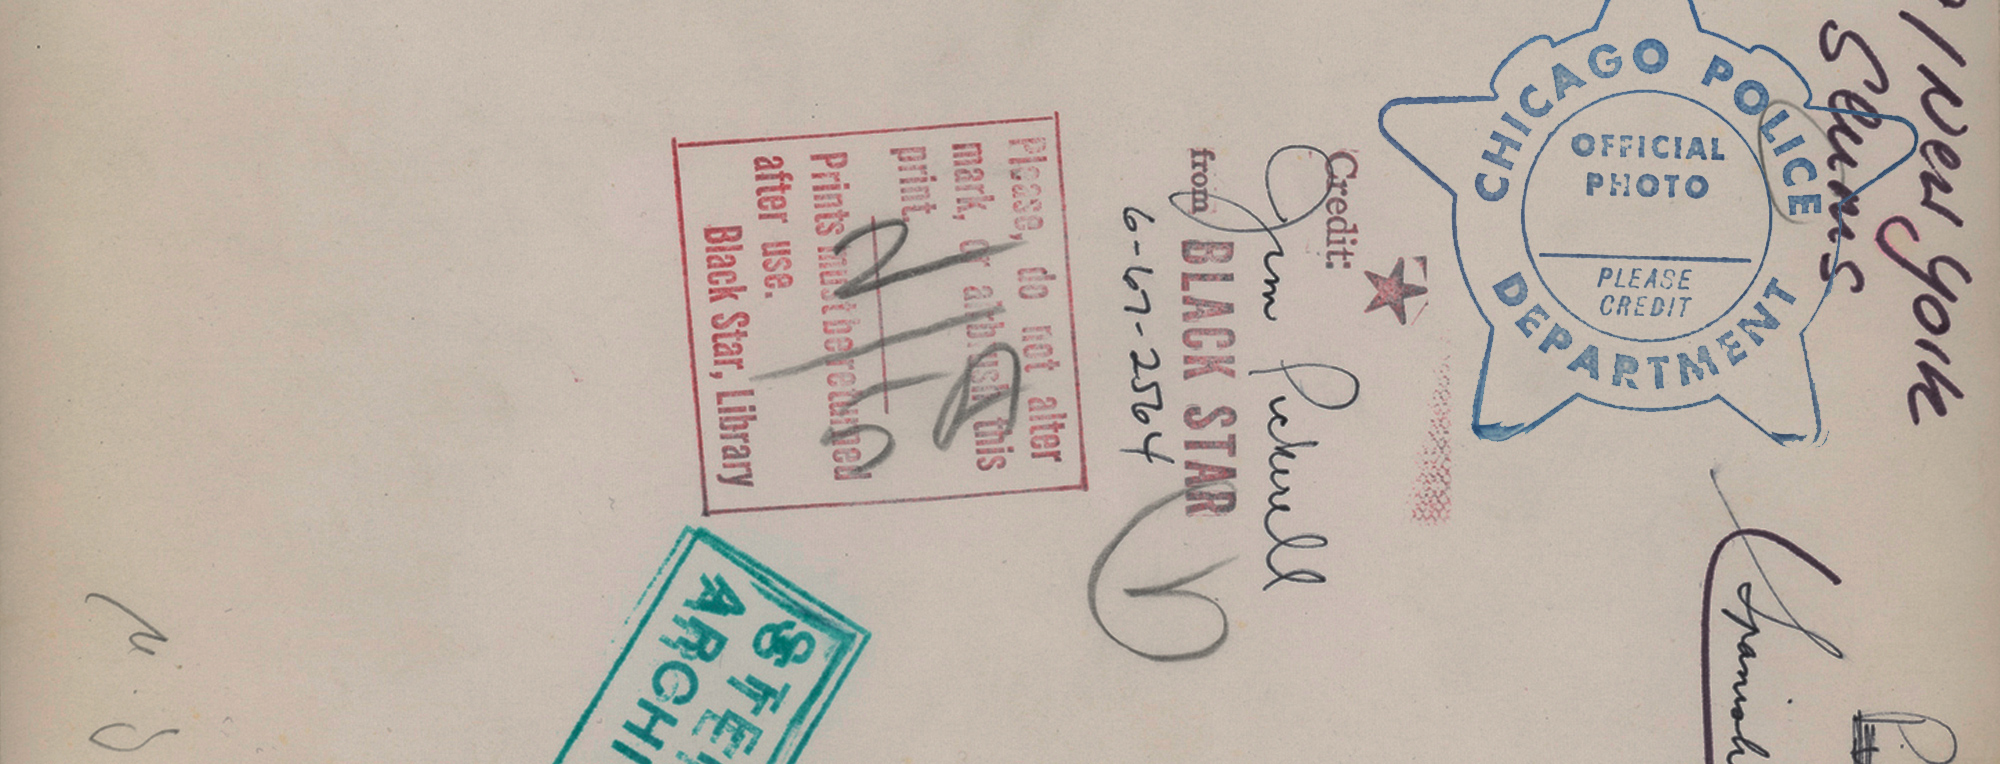 Back side of a vintage police document with stamps and registration numbers.